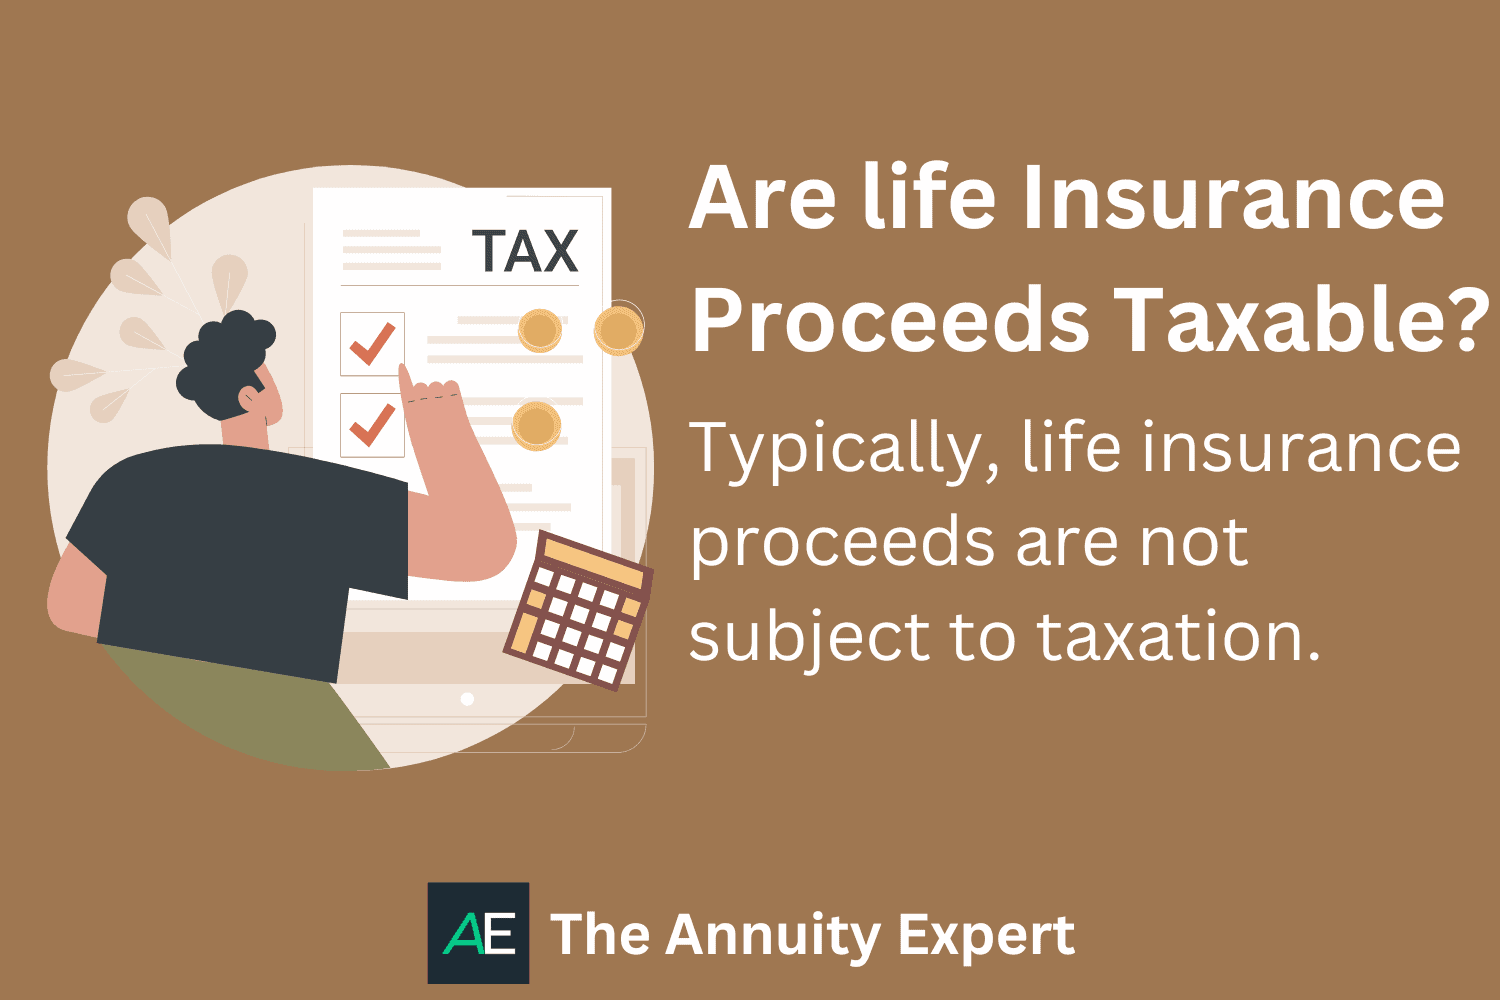 is life insurance taxable?